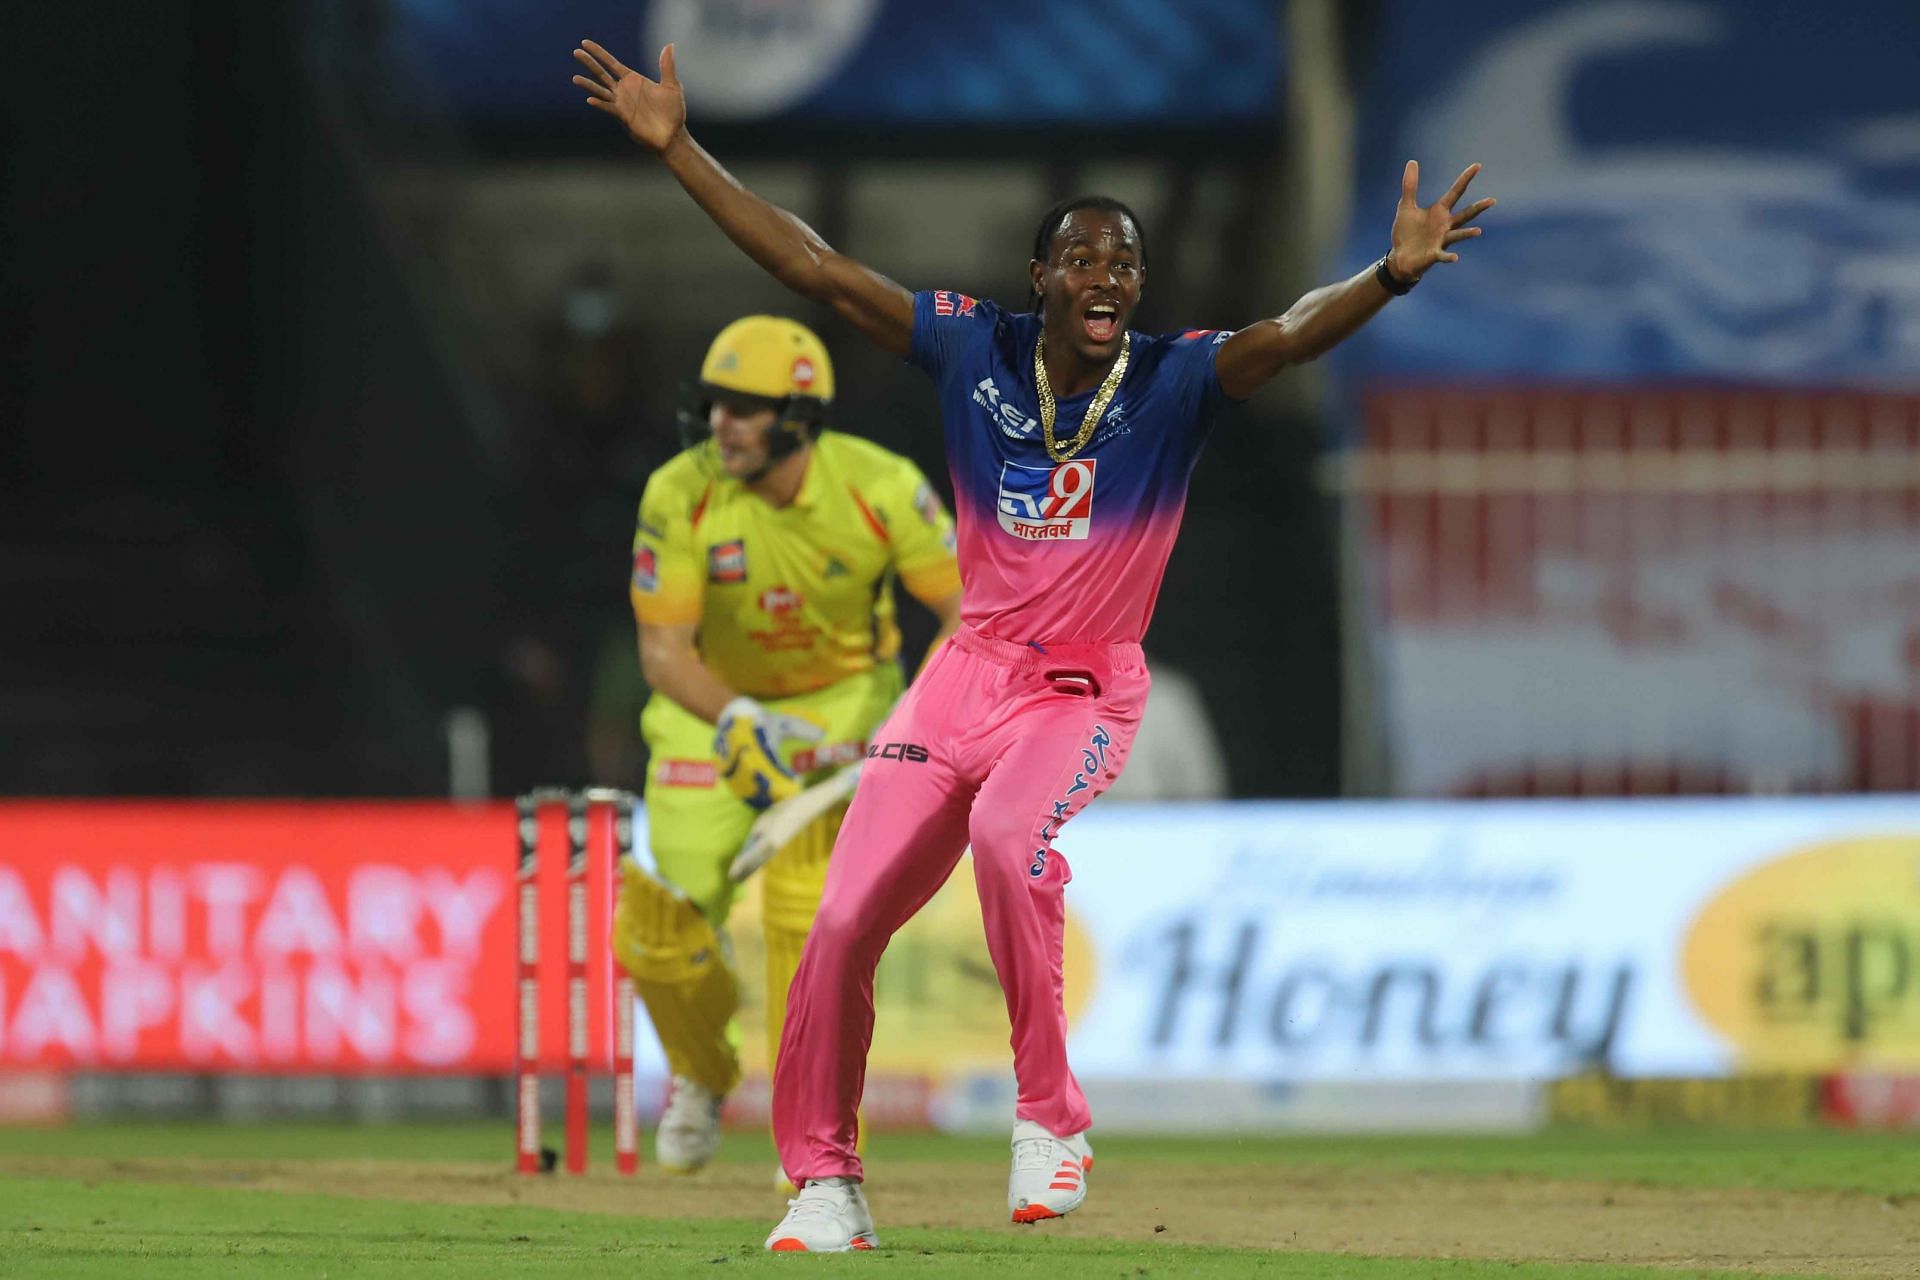 Jofra Archer did not play a single match in IPL 2021 because of injury (Image Courtesy: IPLT20.com)